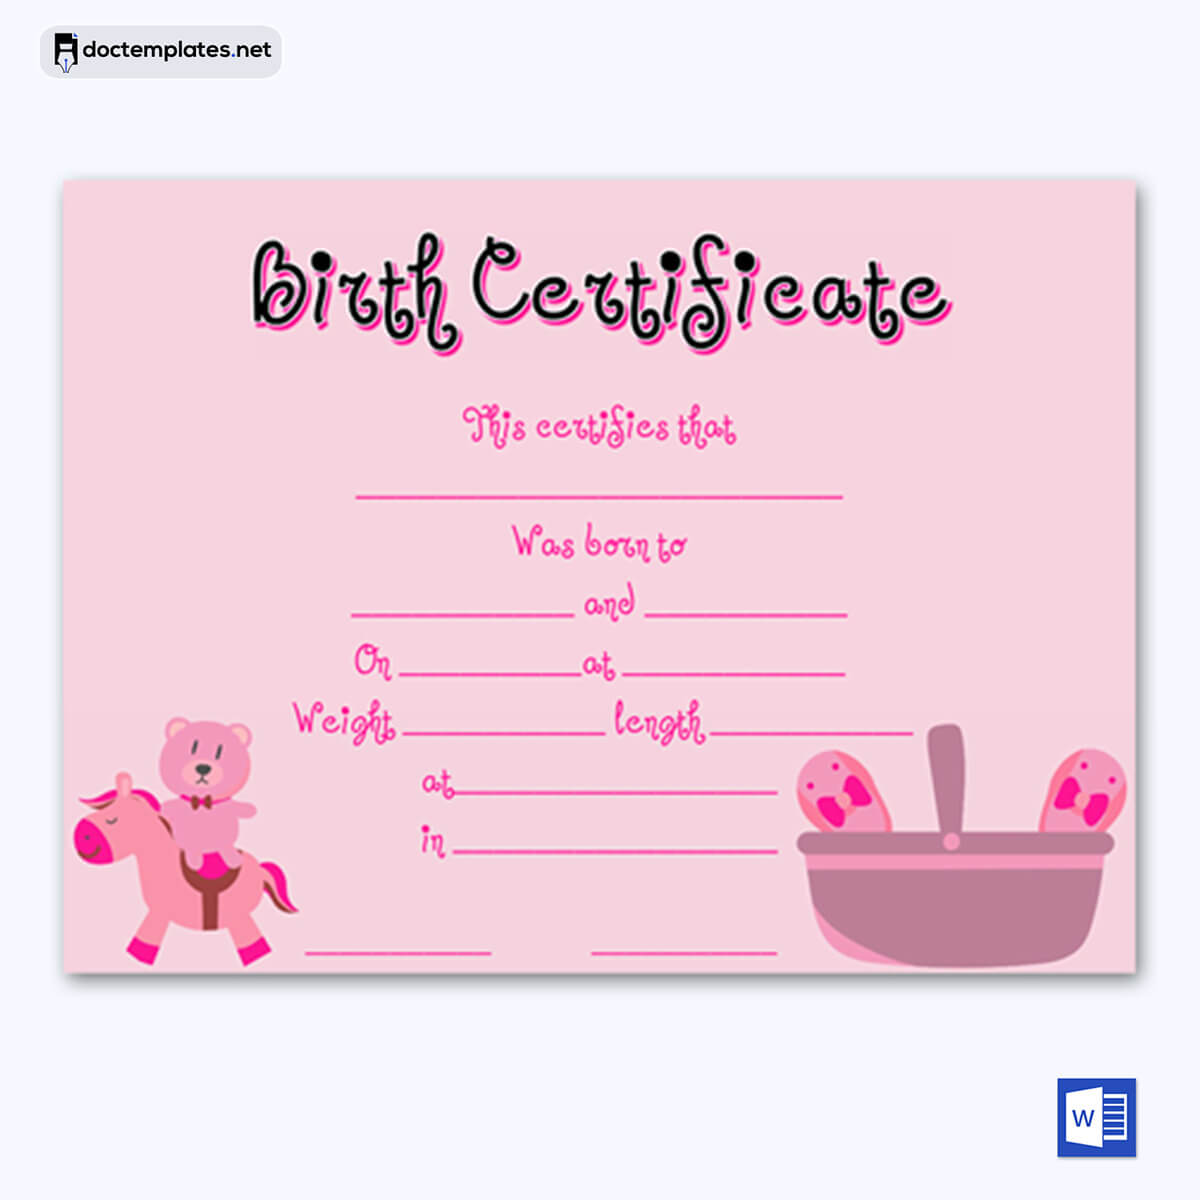 Image of Fillable birth certificate template
Fillable birth certificate template
09